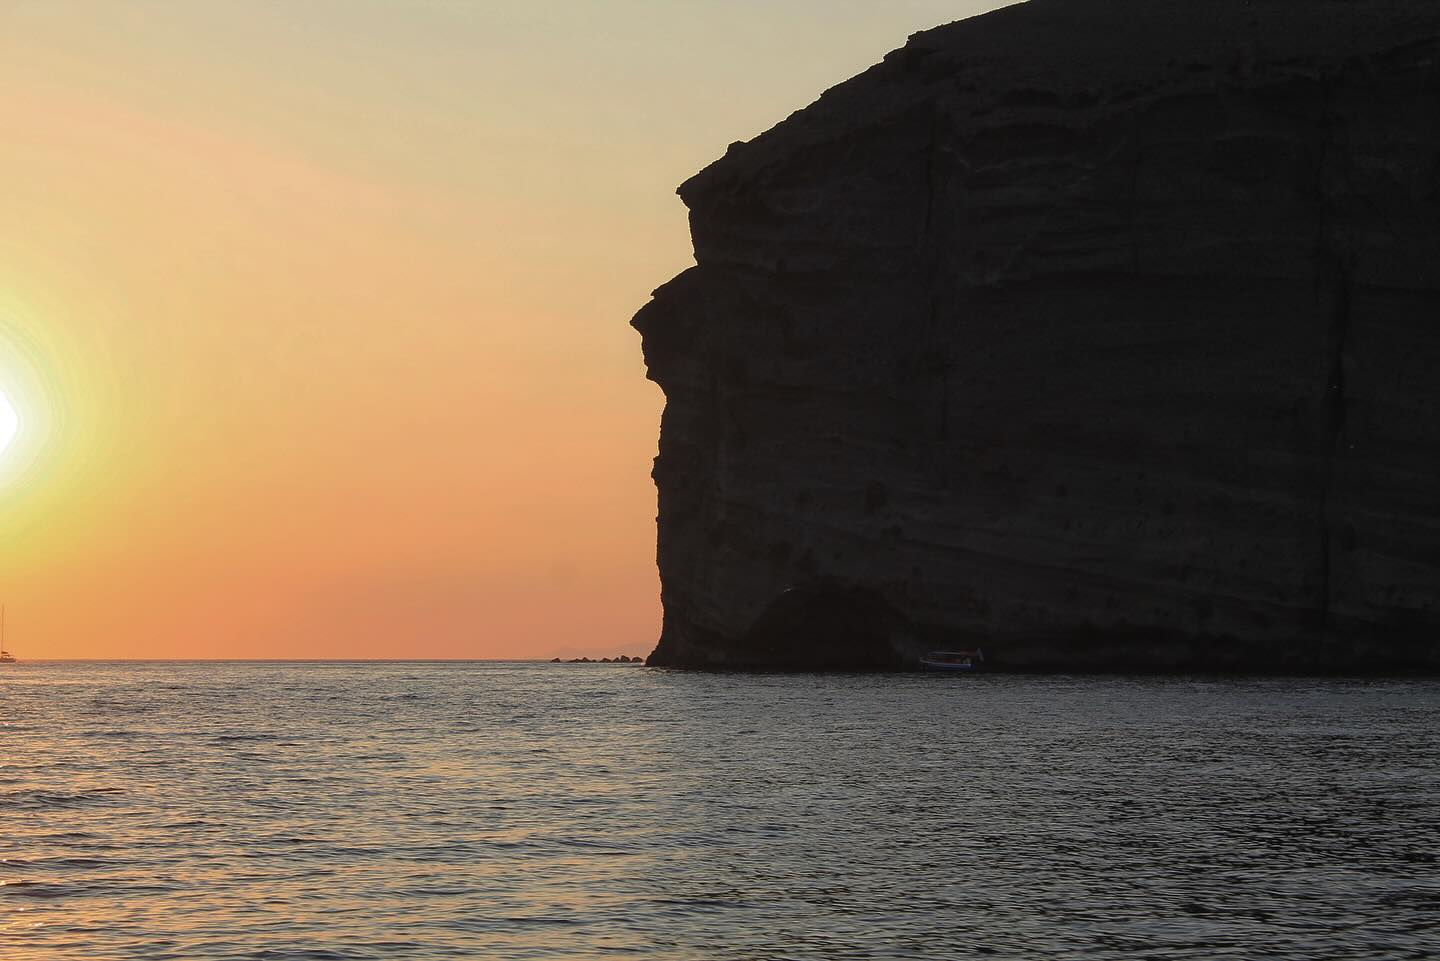 Photo of a Cliff taken from sea level, at golden hour